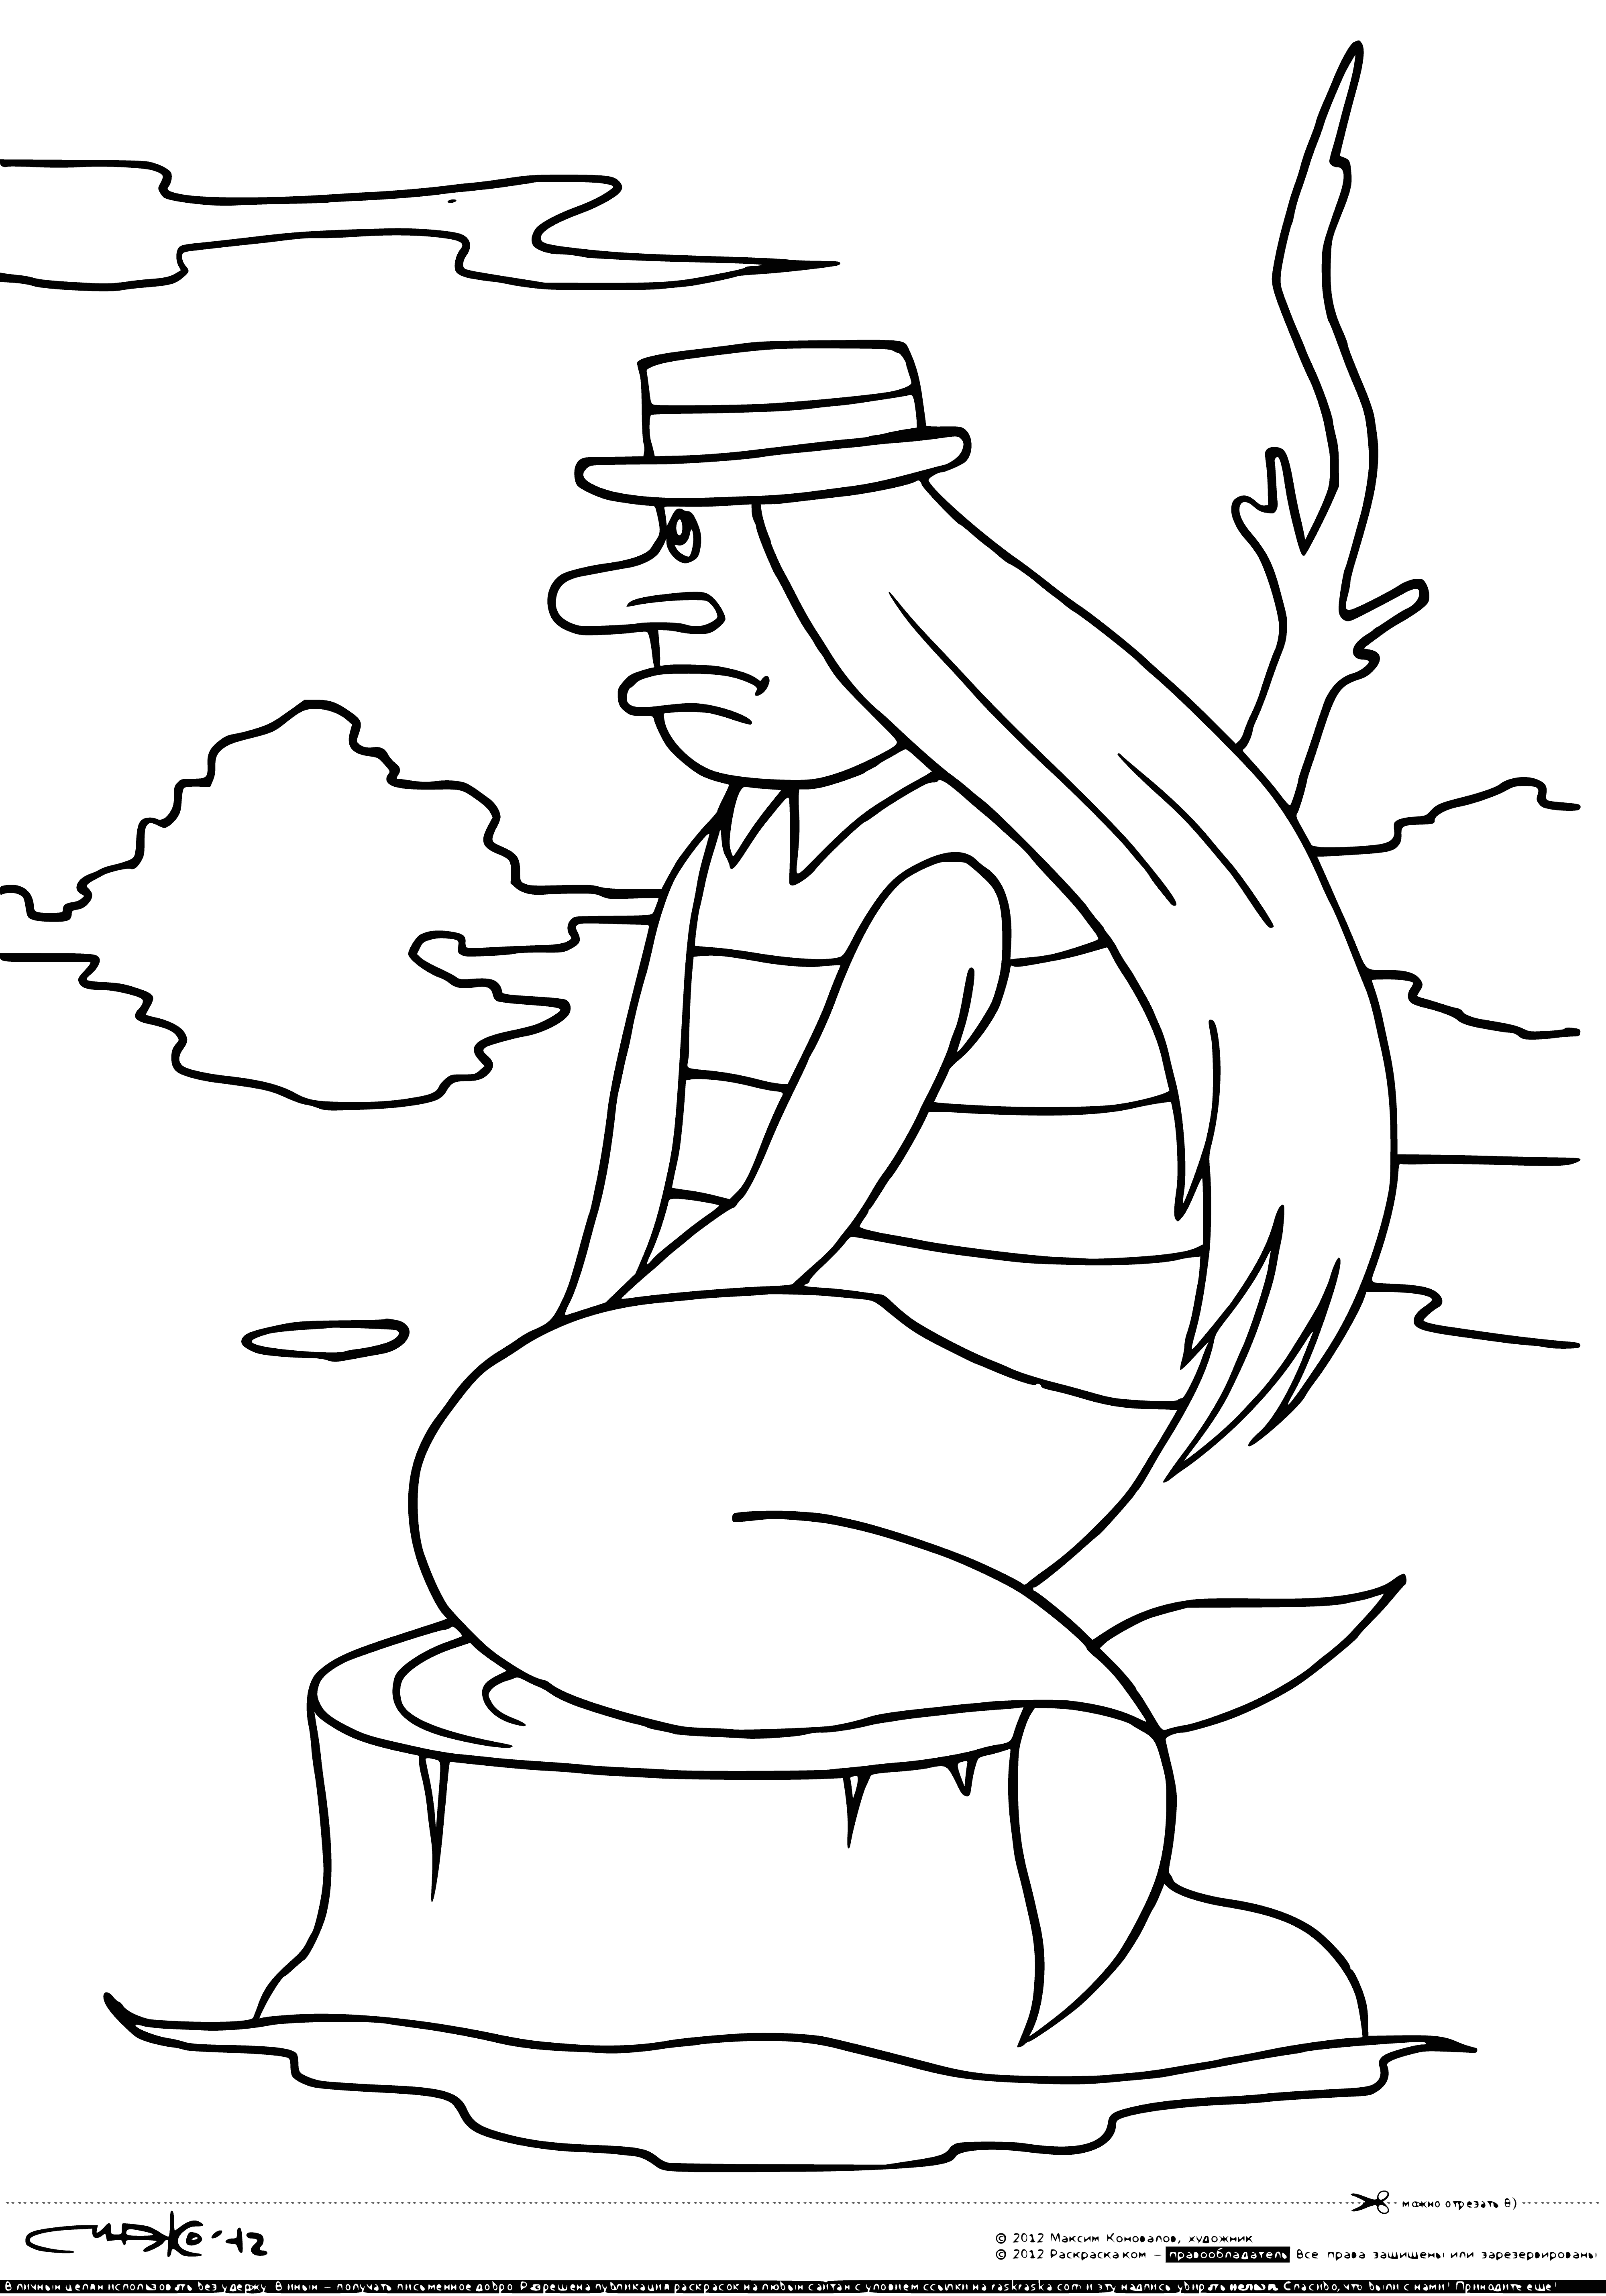 coloring page: Ship made of water, long body & tail, clear wings, flying above body of water.